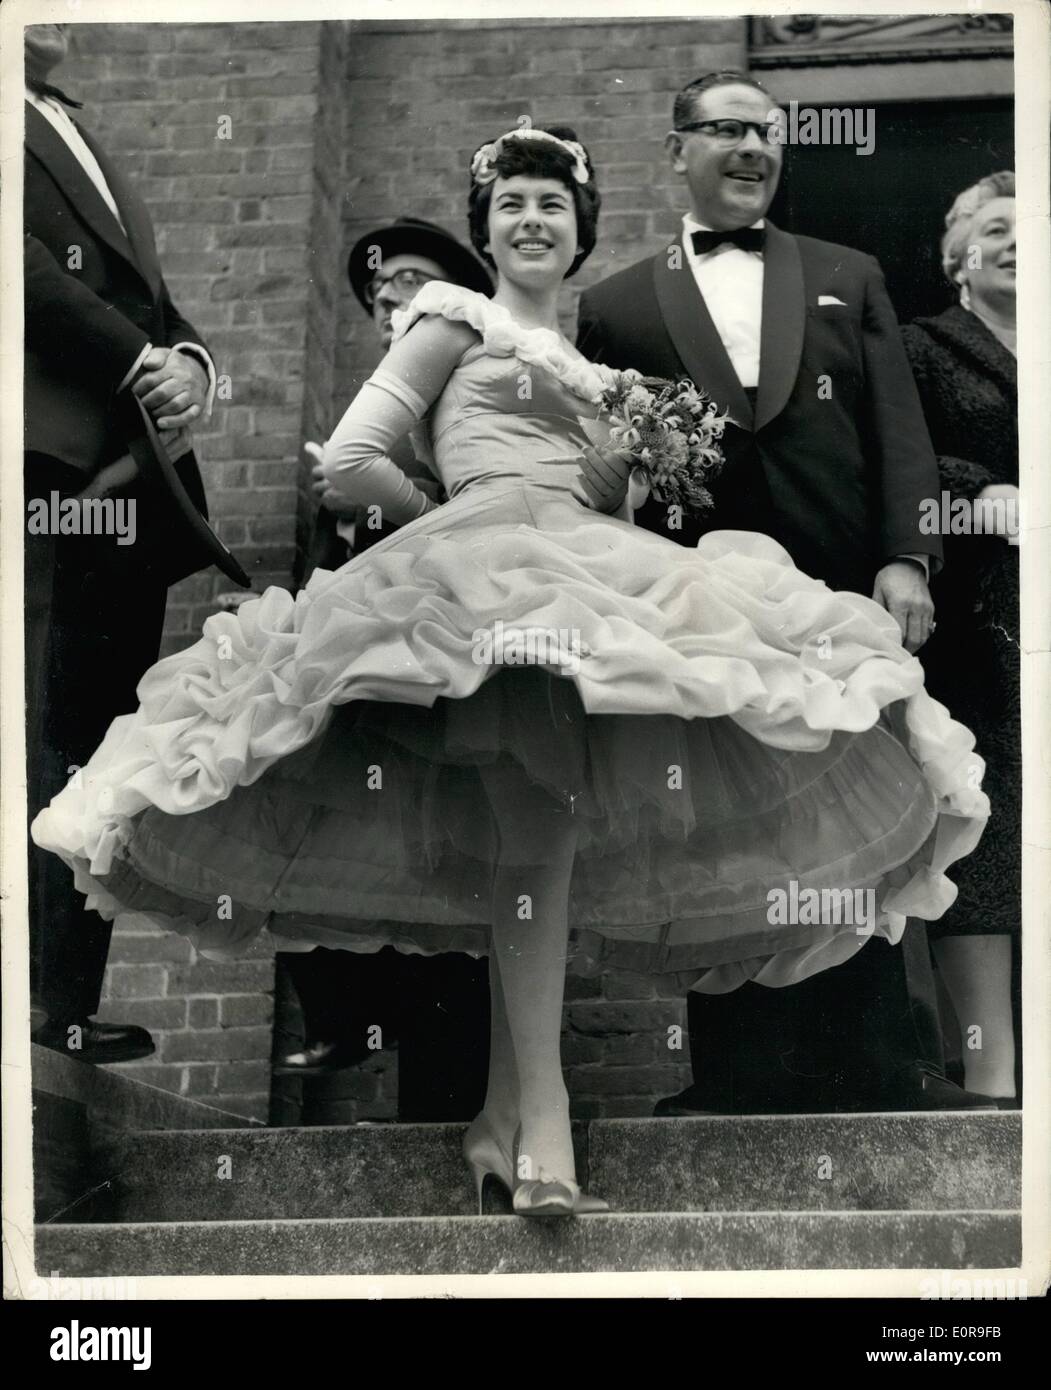 Oct. 10, 1958 - Hula-Hoop Whirl. Bridesmaid's Unusual Dress.: Sandra Kruger ''stole the show'' - with her hula-hoop dress - when she took on the role of bridesmaid yesterday at the wedding of her brother Jeffrey 27 year old managing director of a Munich film and record company to 21 year old model Rene Fifer, at Cricklewood, N.W. Synagogue. Photo shows Sandra Kruger with her hula-hoop skirt dress - at the wedding today. Stock Photo